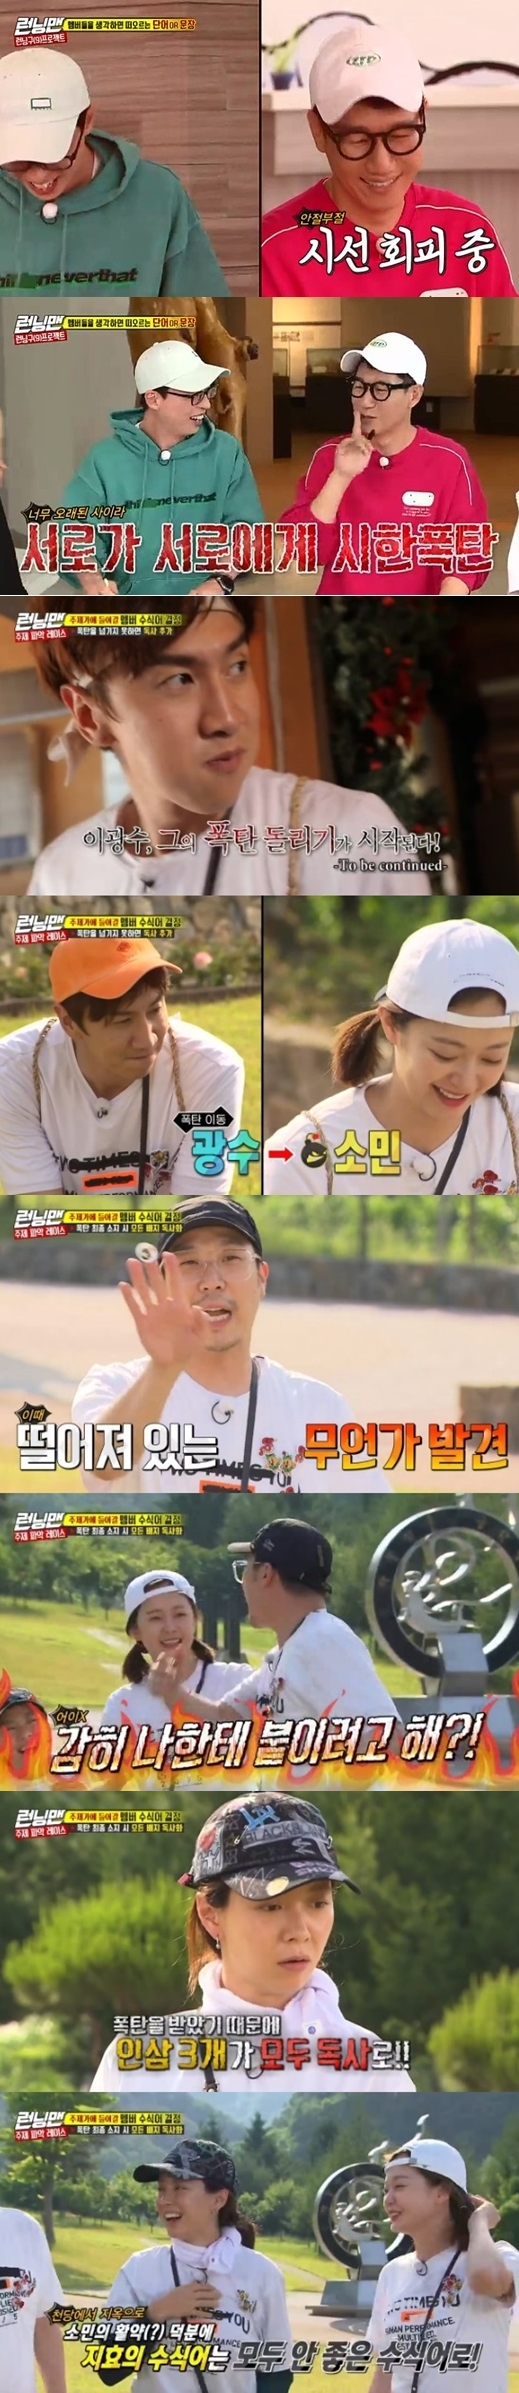 SBS Running Man kept the top spot in the same time zone of 2049 target audience rating.According to Nielsen Korea, the ratings agency, Running Man, which aired on the 16th, soared to 8.4% of the highest audience rating per minute, and the 2049 target audience rating, an important indicator of major advertising officials, recorded 3.8% (based on the second part of the audience rating of households in the Seoul Capital Area), ranking first in the same time zone, surpassing Masked Wang and Donkey Ears.The average audience rating was 5.2% in the first part and 6.8% in the second part (based on the audience rating of households in the Seoul Capital Area).The broadcast was decorated with a theme-reading race for the theme song to be presented at the Fan Meeting this summer.The members had to set the number of good modifiers ( Ginseng badges) and bad modifiers (poison badges) of the theme song while they decided to participate in the songwriting of the theme song themselves, and had to move to the bomb within an hour of the bomb because there was a bomb.Because there is a time limit for bombs, if you pass that time, you will get a viper badge. Even if you take it, you will get another viper badge.Among them, Jeon So-min showed off the like a poison that led to the reversal, shook the plate of the race, and noticed that he had a bomb late on the last mission.The scene soared to 8.4% of the audience rating per minute, accounting for the best one minute.So, Jeon So-min showed boldness of handing over his bomb to Song Ji-ryu, and Song Ji-hyo, who ran Race 1st pRace, had to watch his ginseng badge turned into a poison badge at the last minute.Yoo Jae-Suk took the first pRace in the race with Fisherman Jiri, and Yoo Jae-Suk chose a modifier to enter the theme song based on the badge of each member.The Running Man Theme Song, which participated in the members lyrics, will be unveiled at the Running Man Fan Meeting to be held this summer.